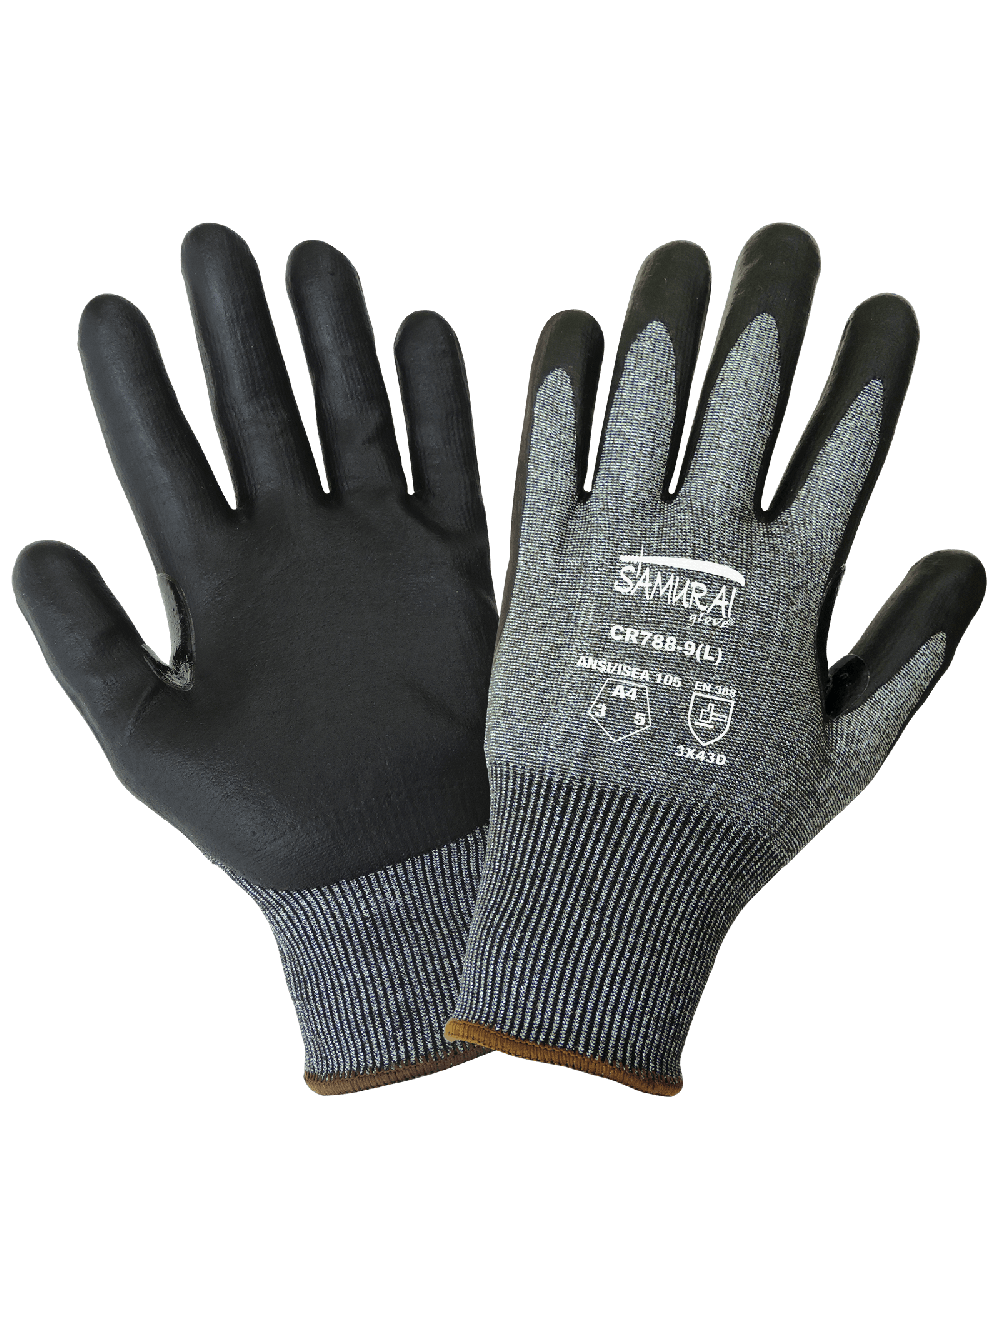 Samurai Glove® Touch Screen Compatible Cut, Abrasion, and Puncture Resistant Gloves - CR788